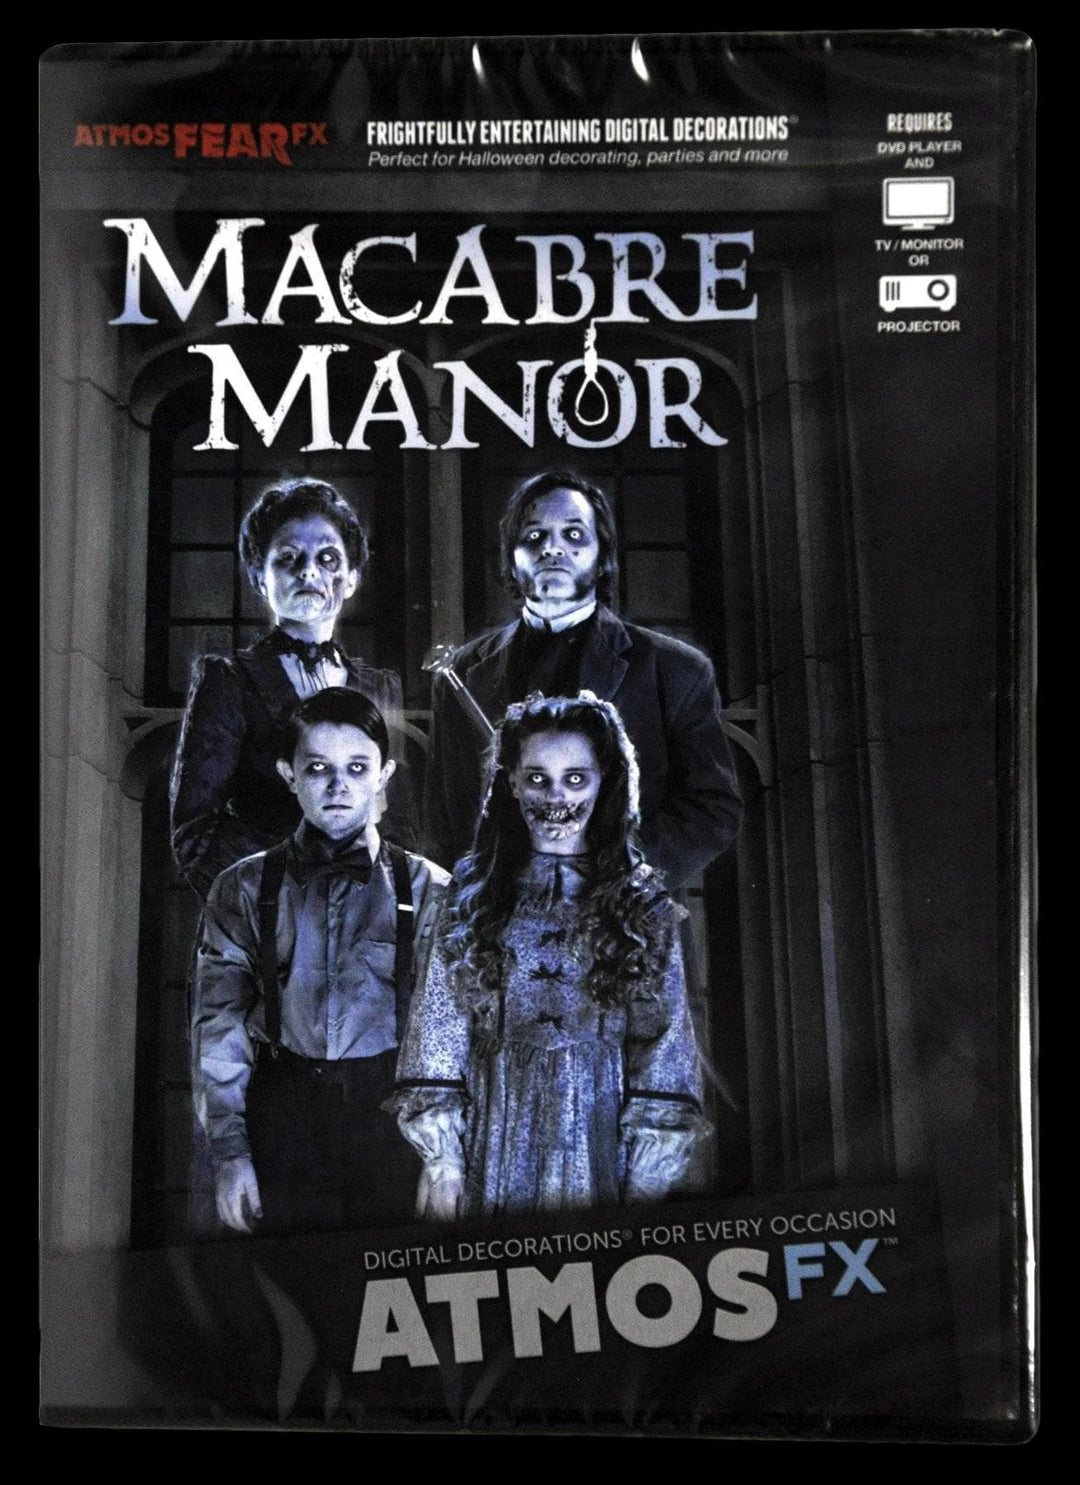 "Macabre Manor DVD" Haunted House Effects Video